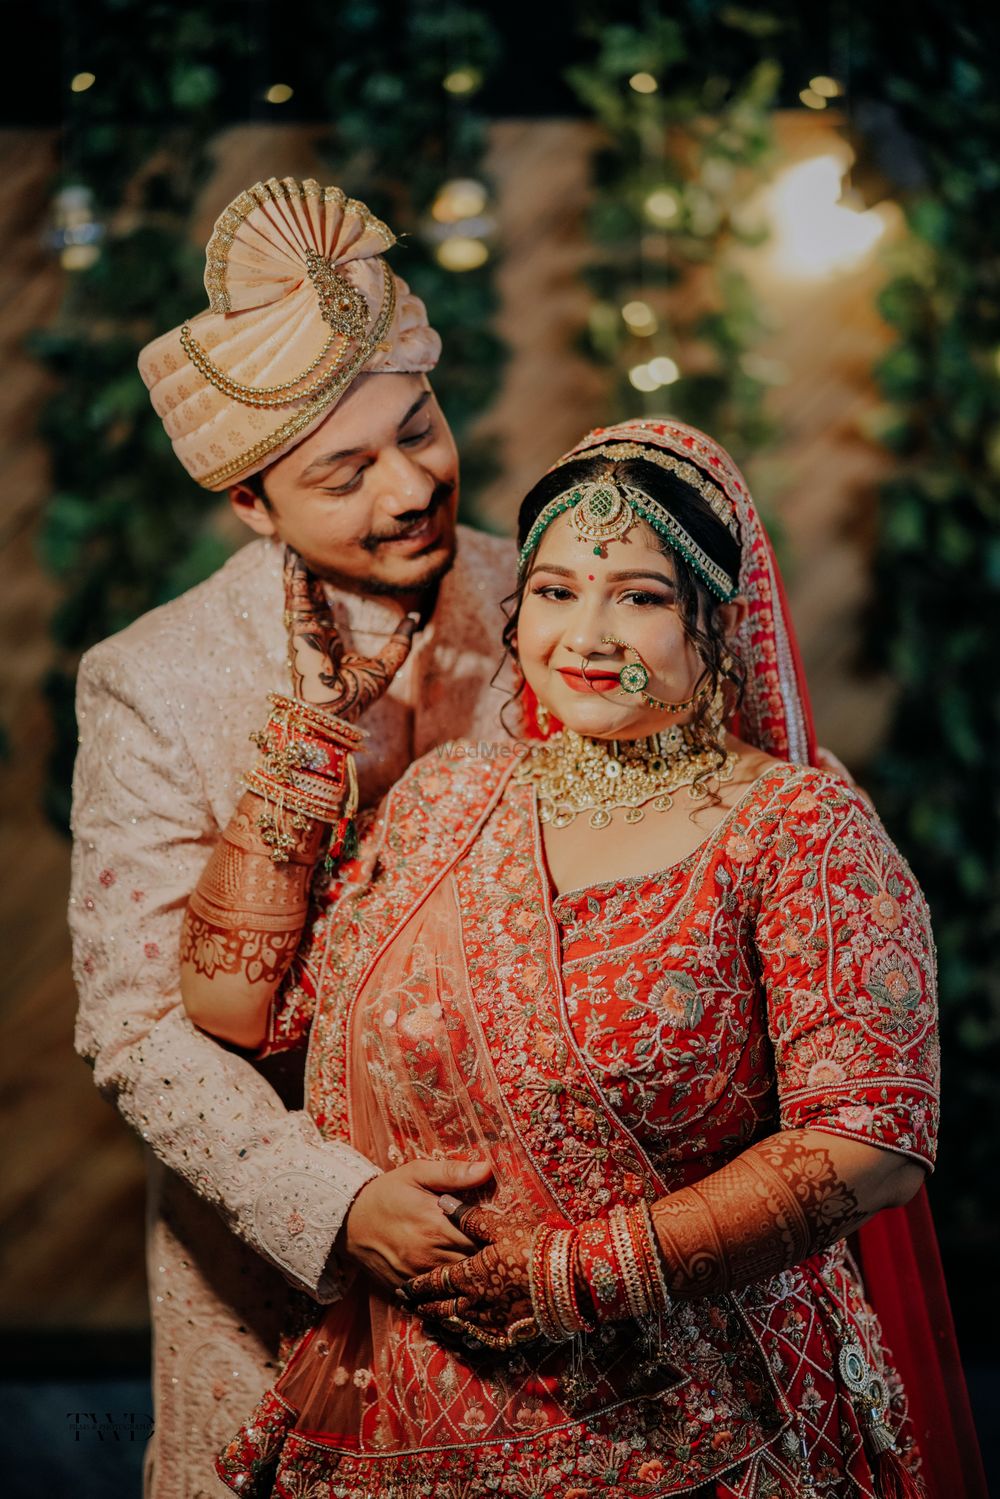 Photo From Forever Captured: Pranav & Disha's Love Story - By The Wedding Drama